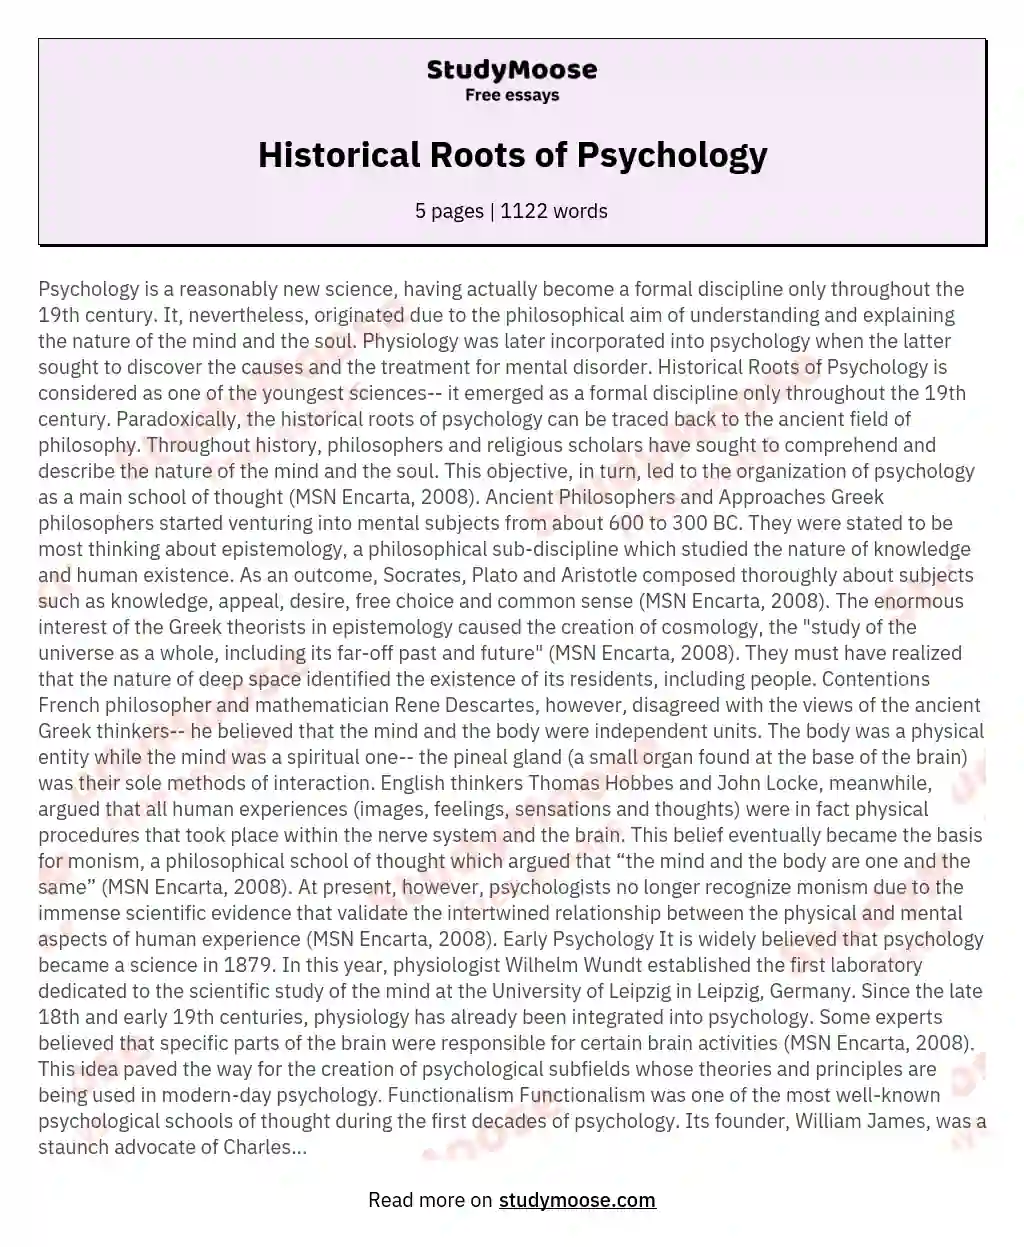 Historical Roots of Psychology